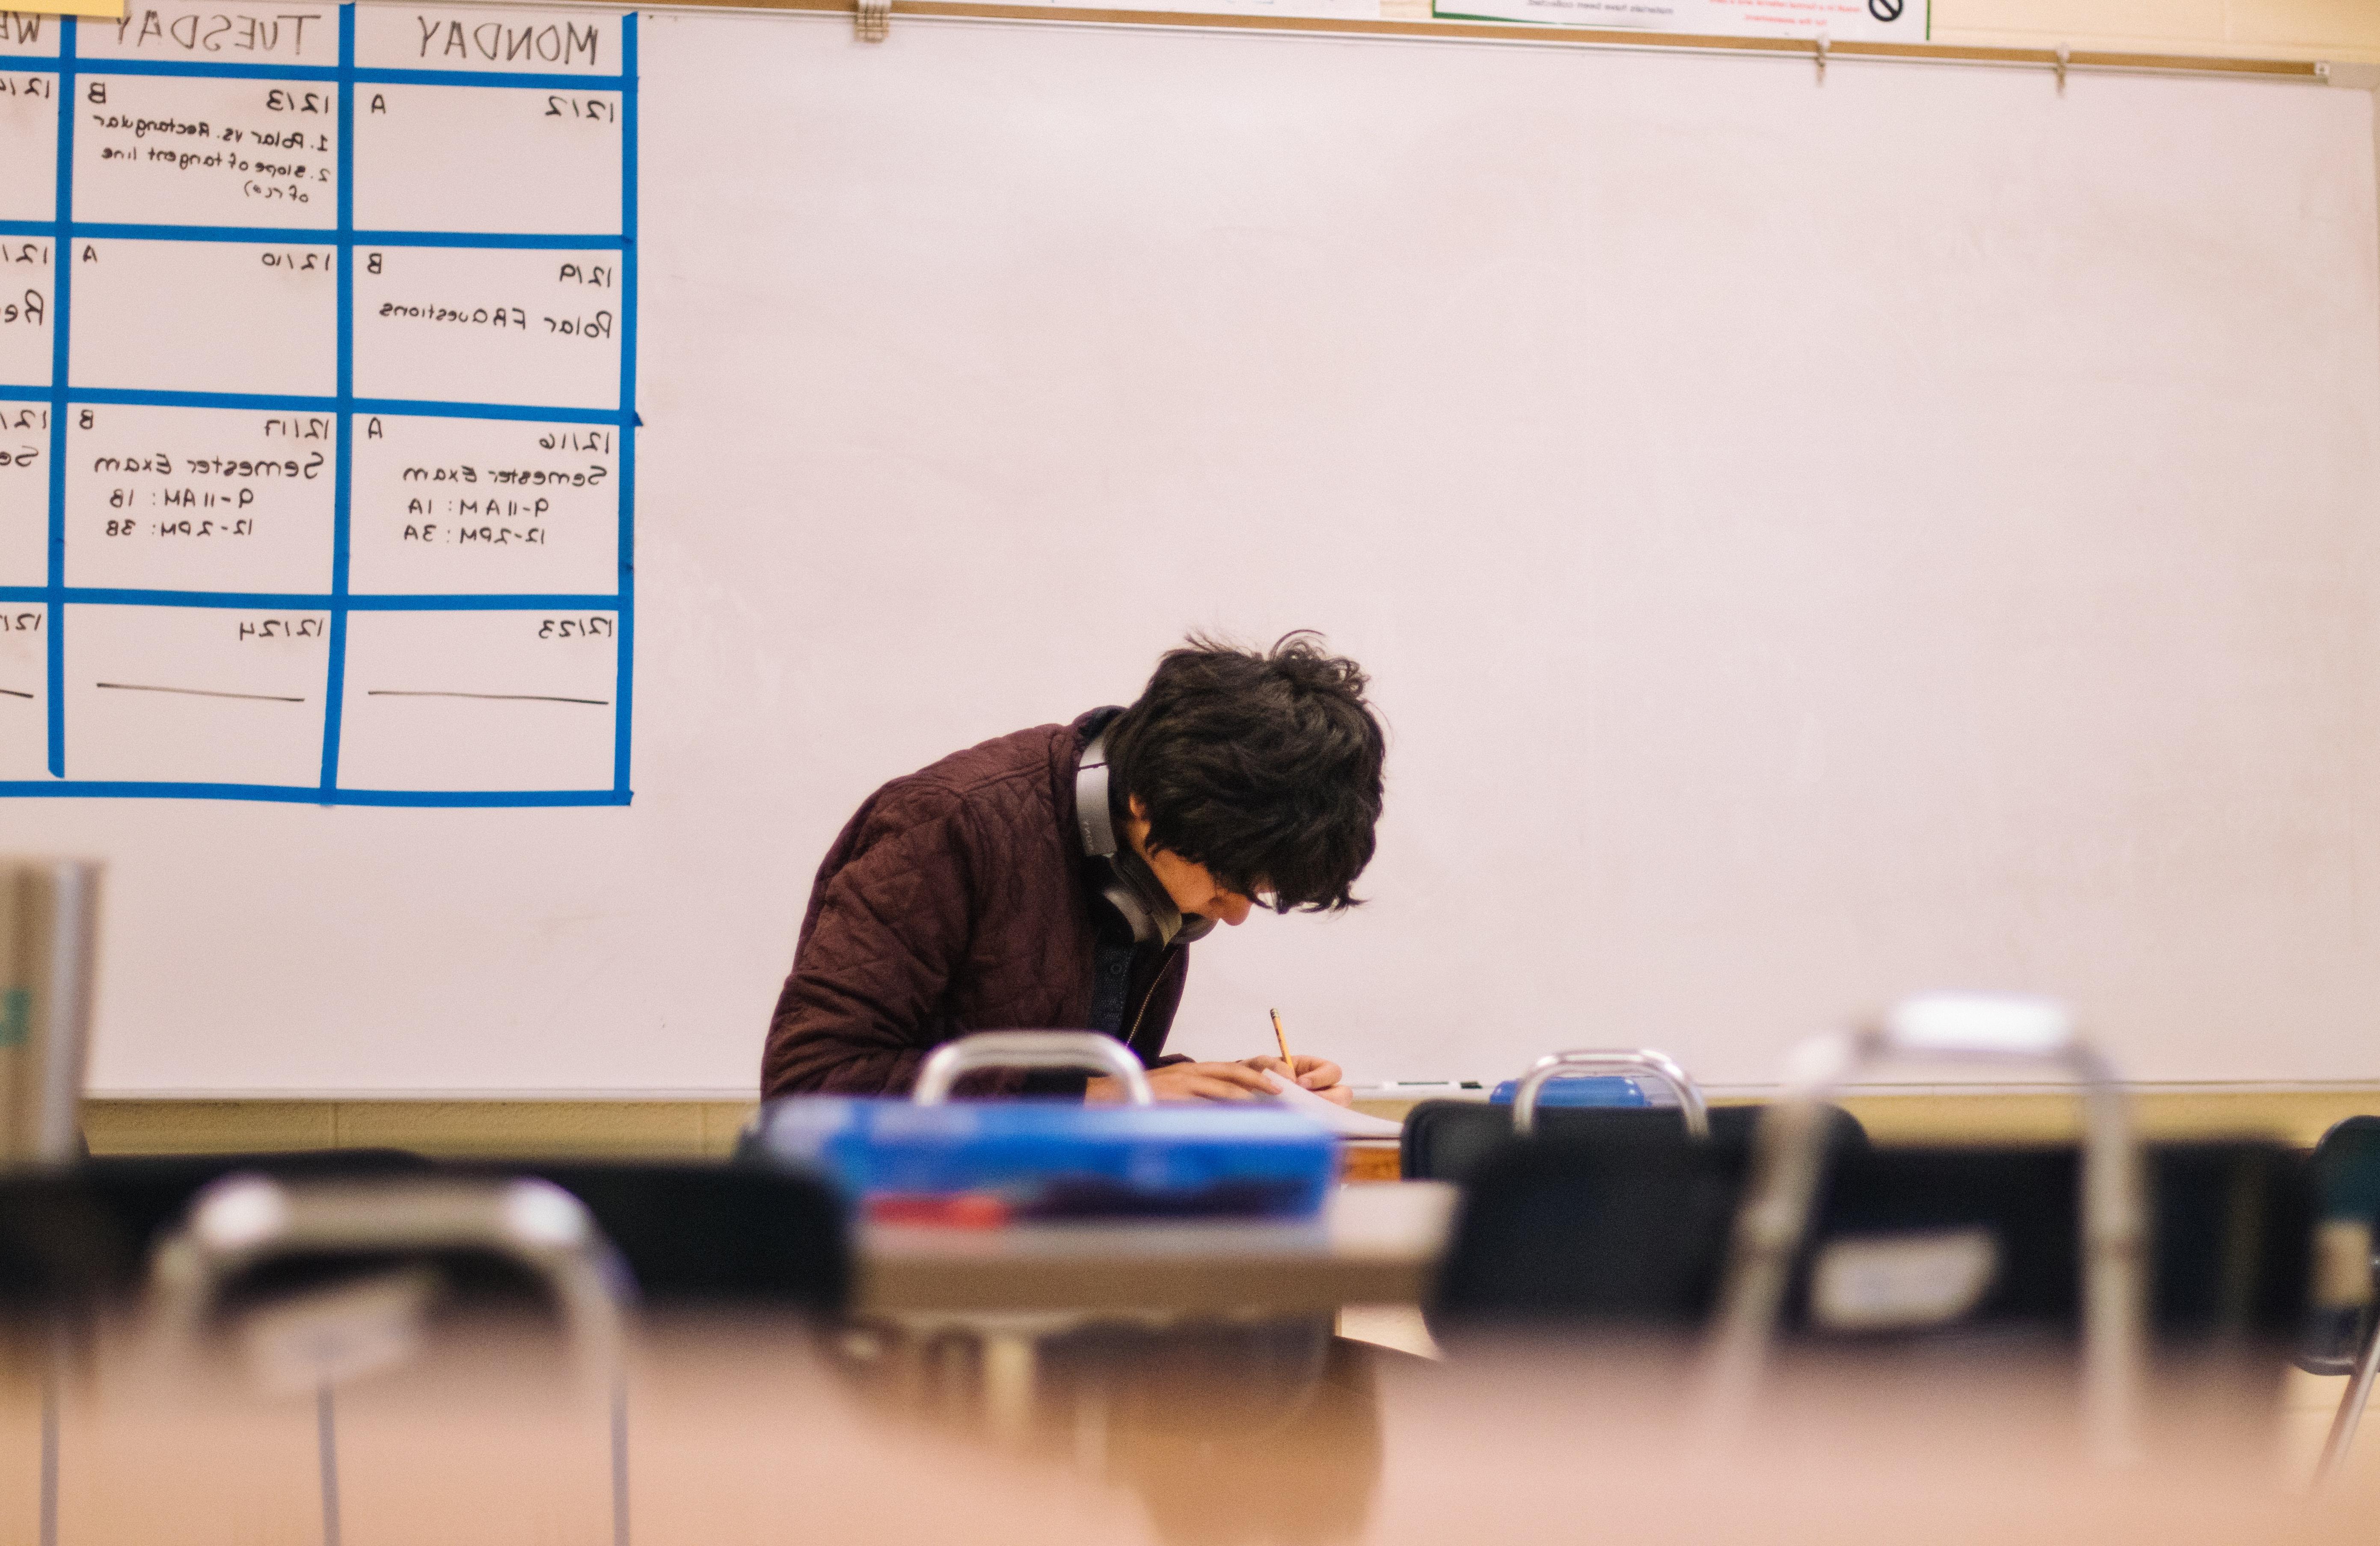 A student sitting alone at his desk while he completes an assignment